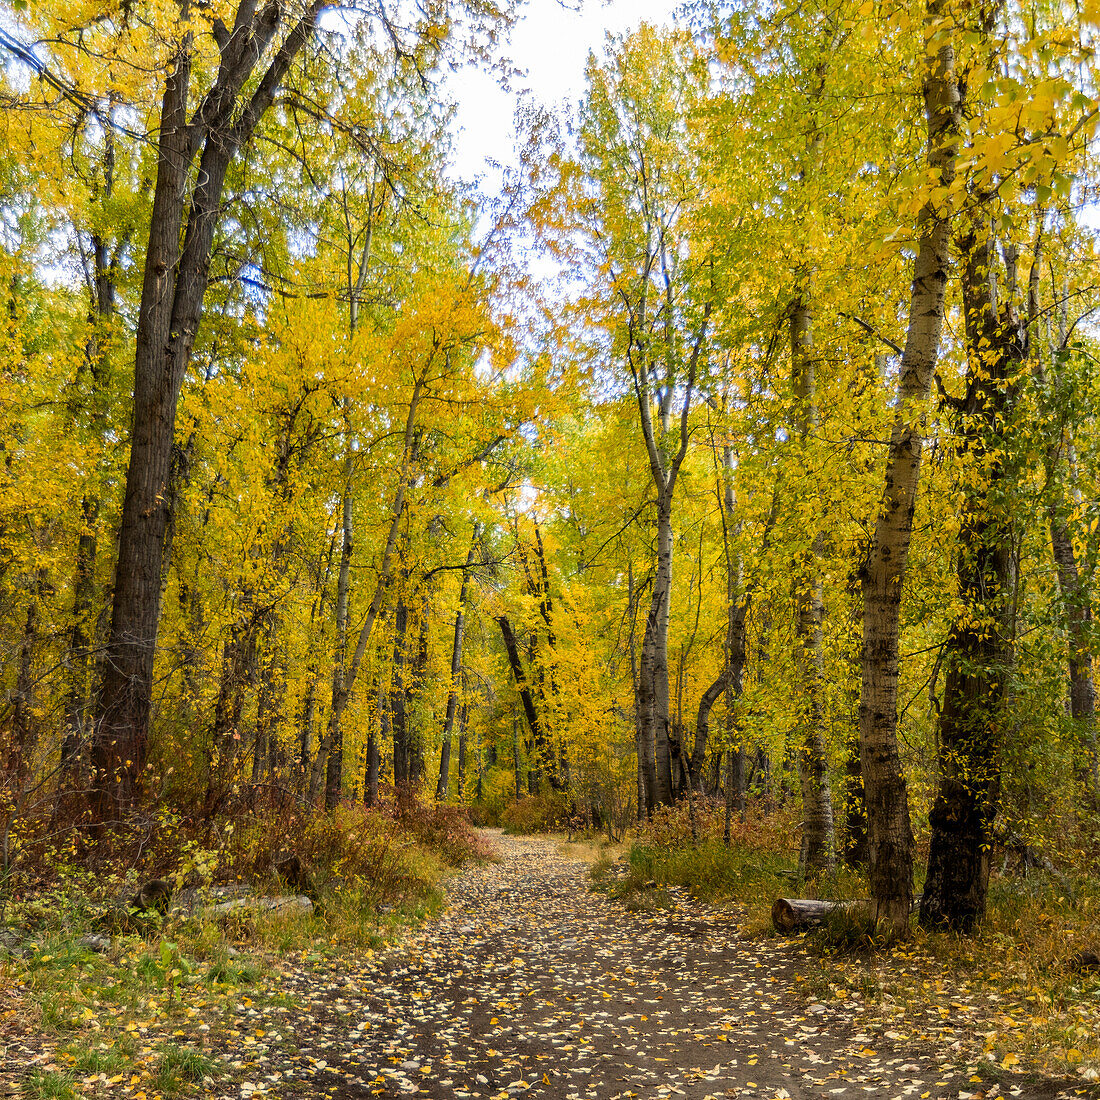 USA, Idaho, Hailey, Footpath covered with fallen leaves in Autumn forest